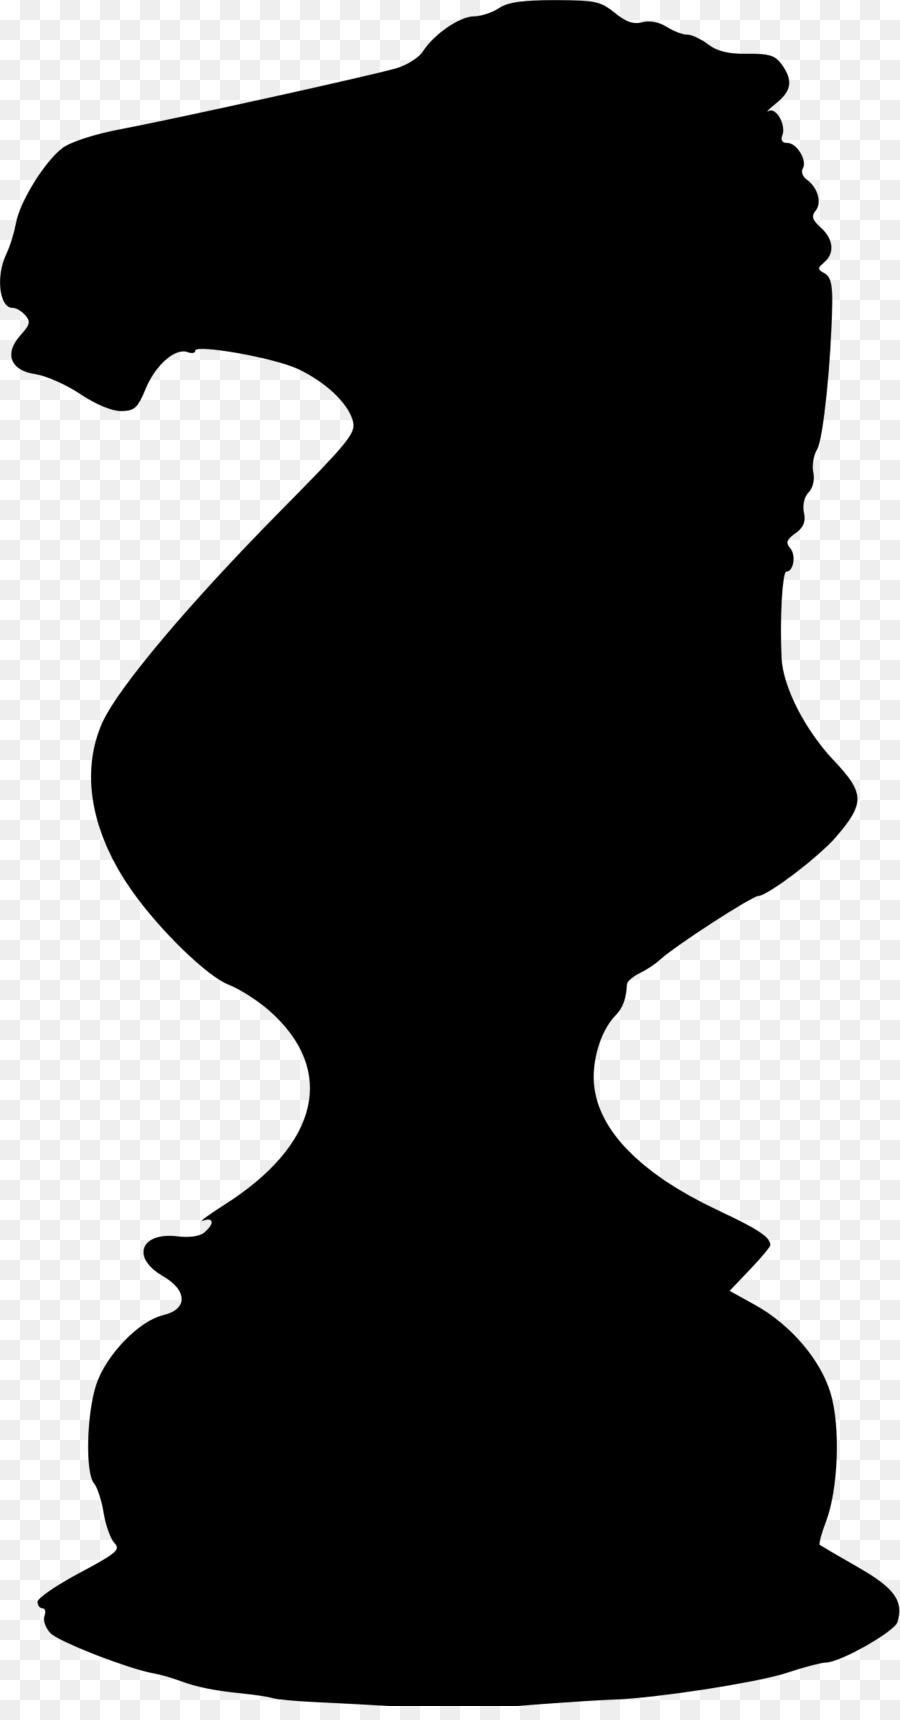 Chess piece Knight Rook Clip art - Chess Board Cliparts png download - 1254*2377 - Free Transparent Chess png Download.